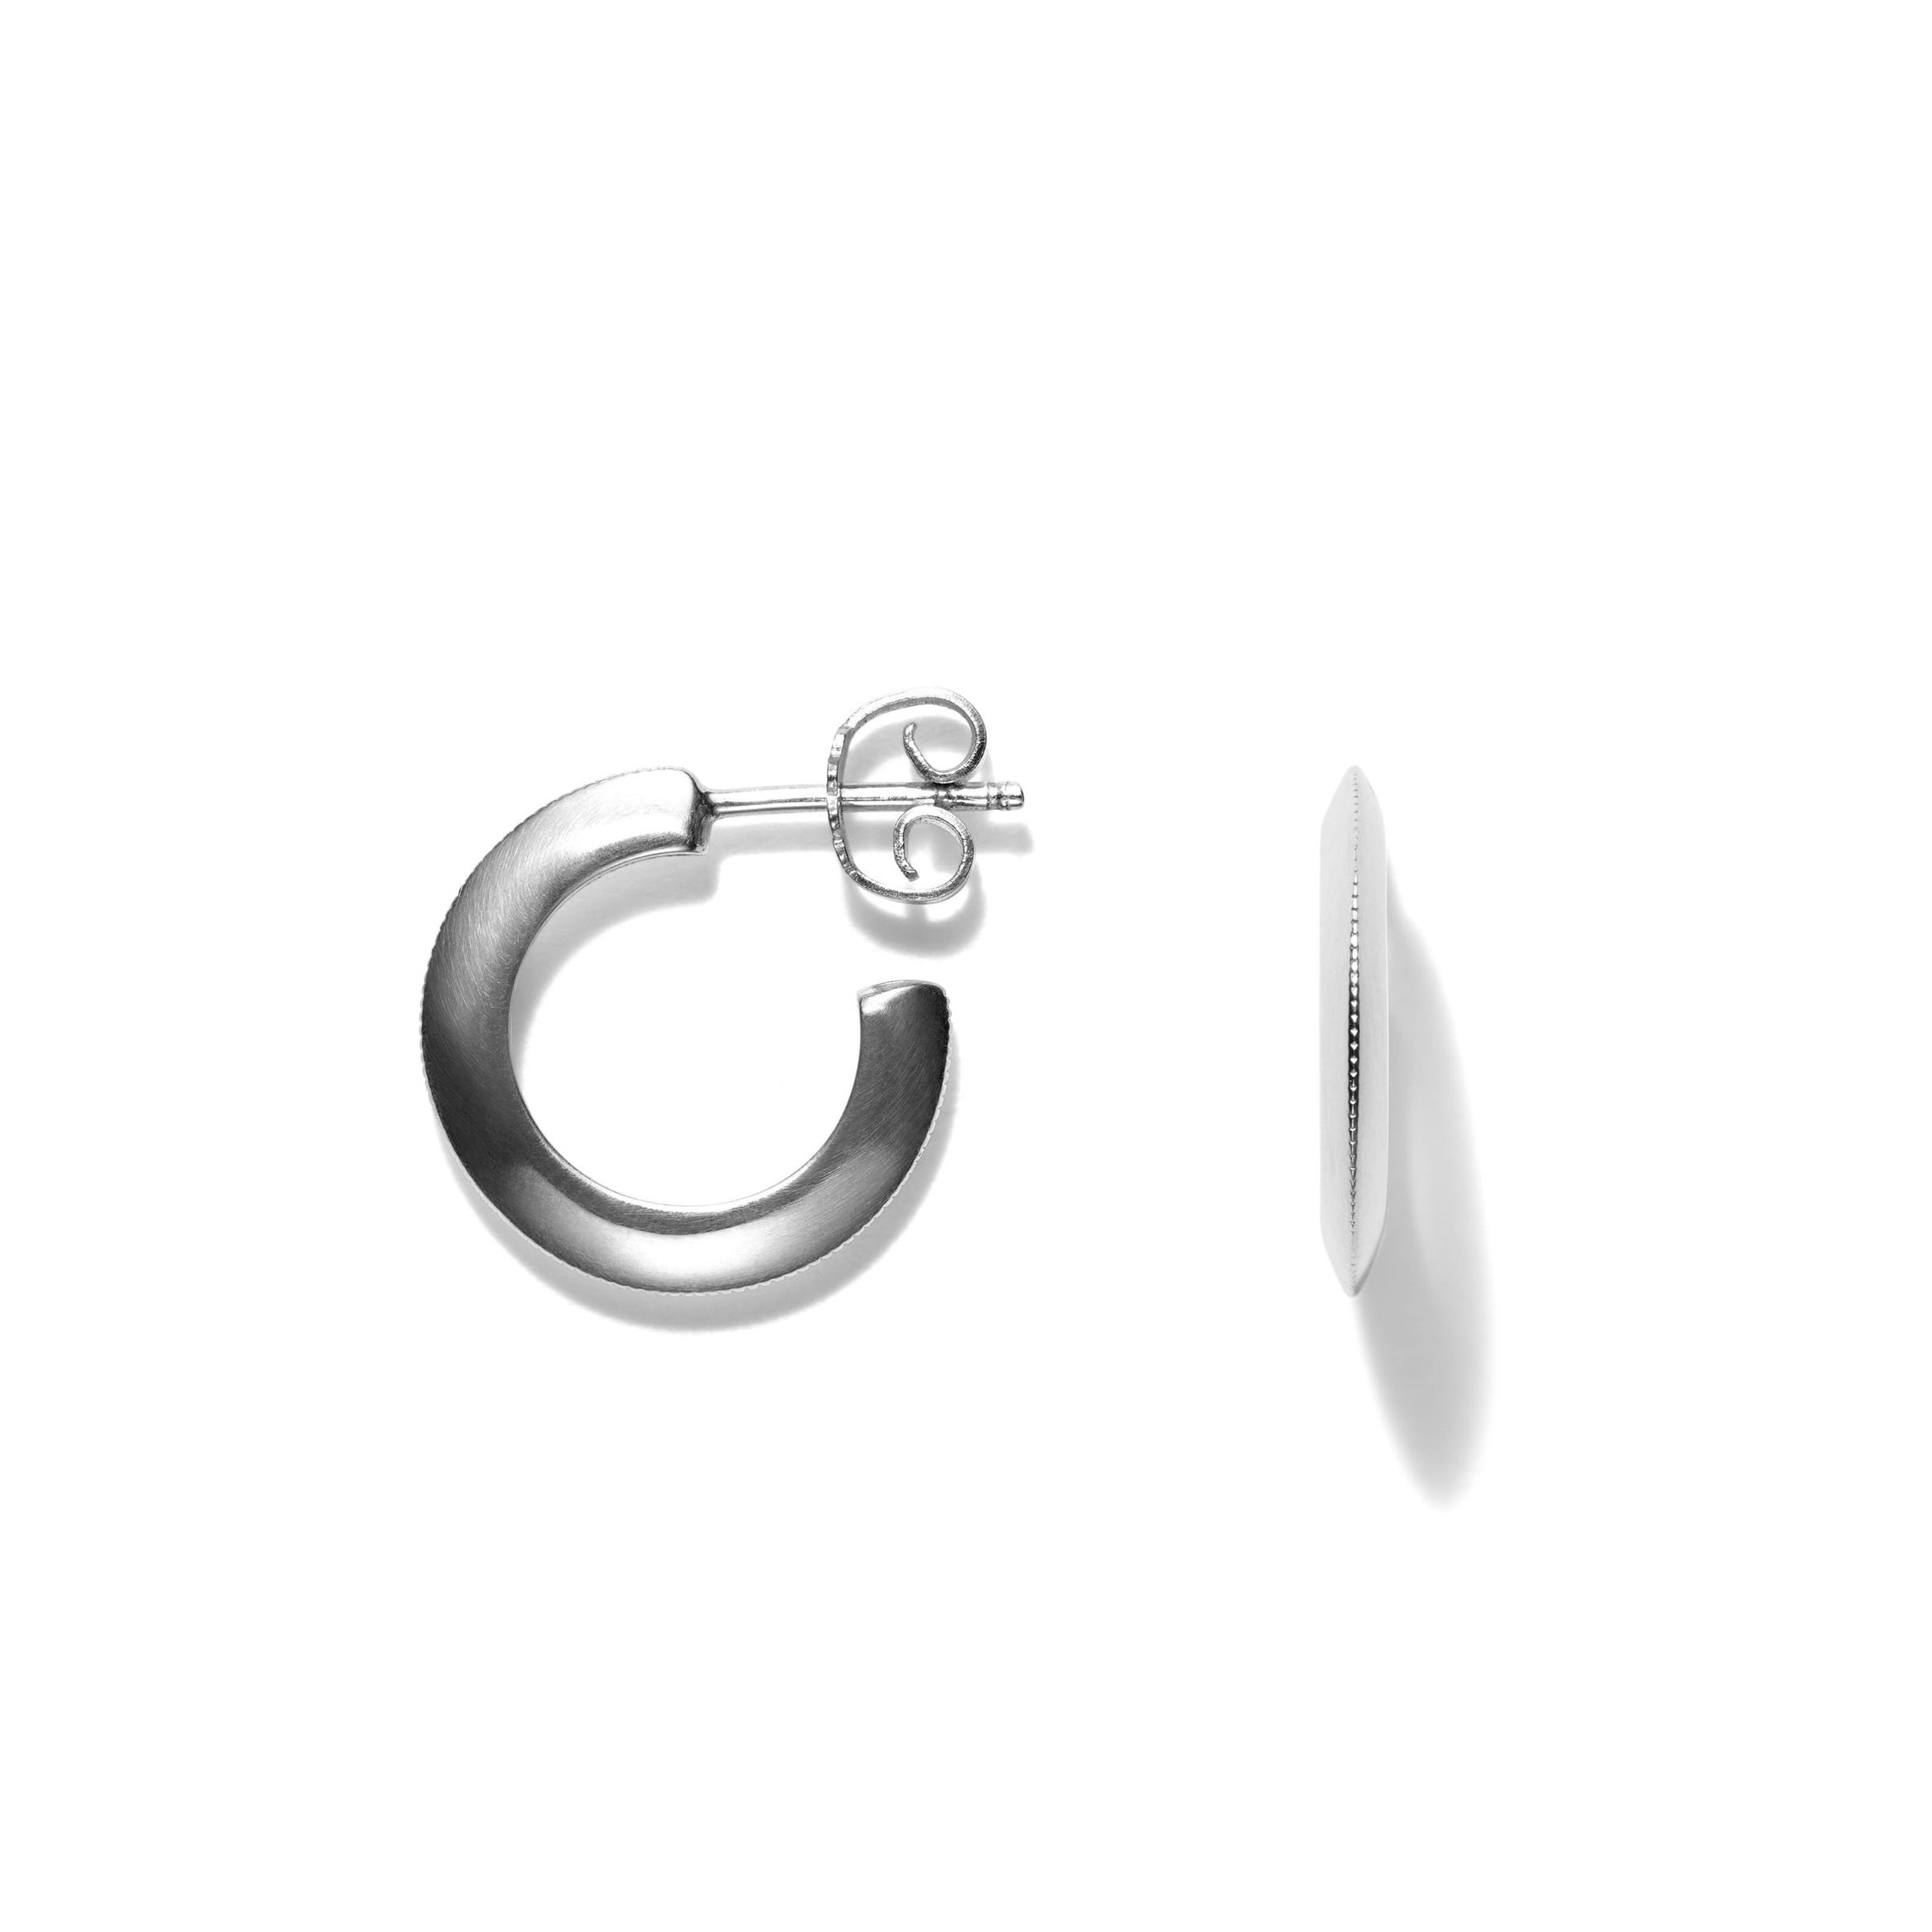 Line & Jo miss Emmo earring in high polished sterling silver